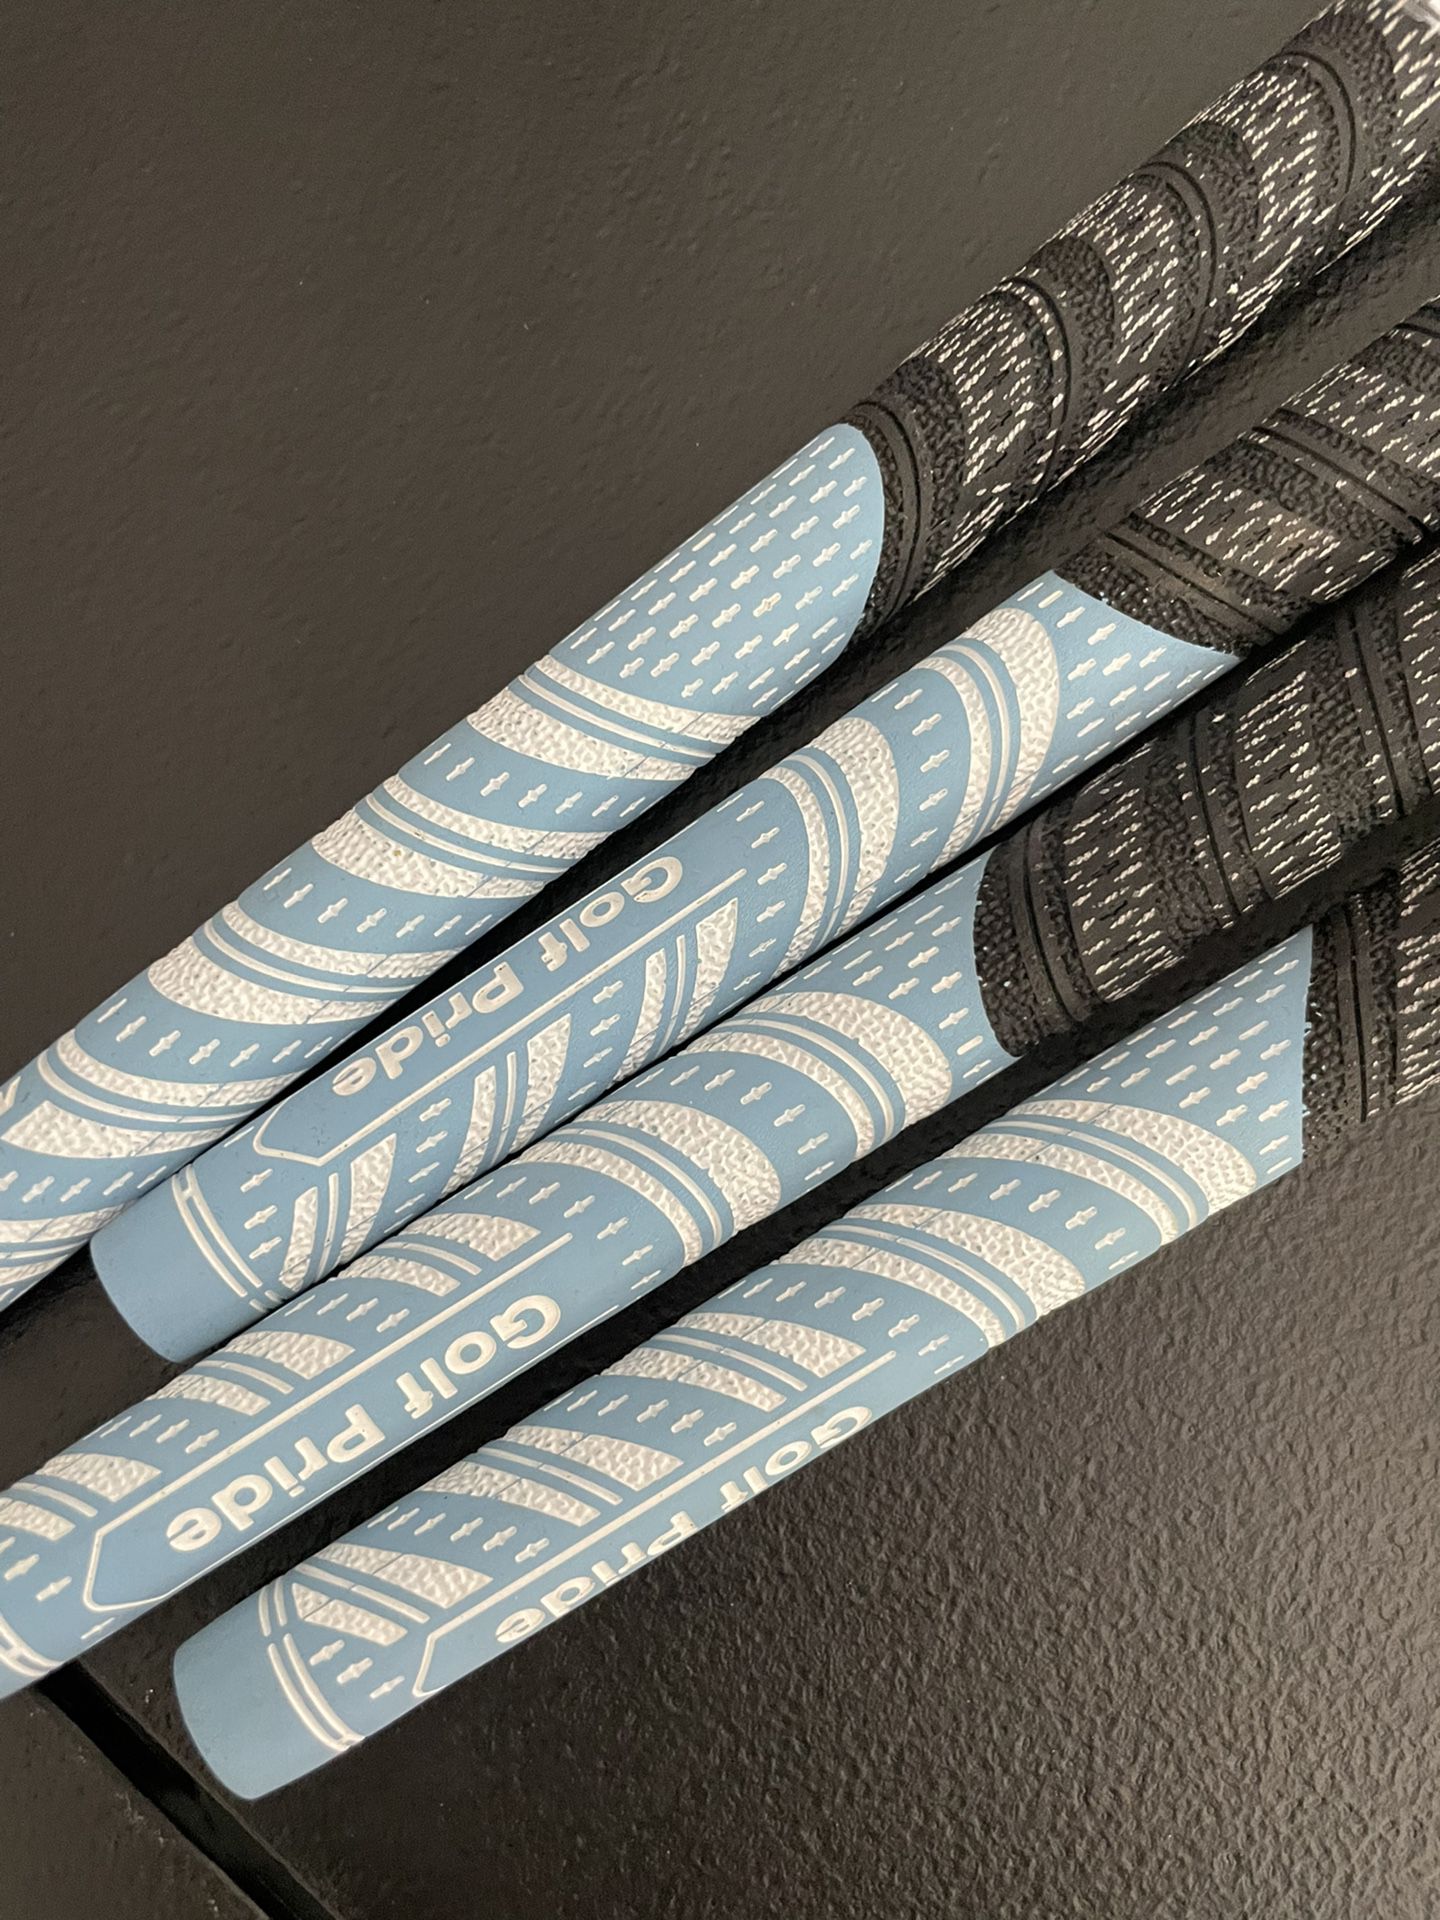 Golf pride mid size grips in light blue